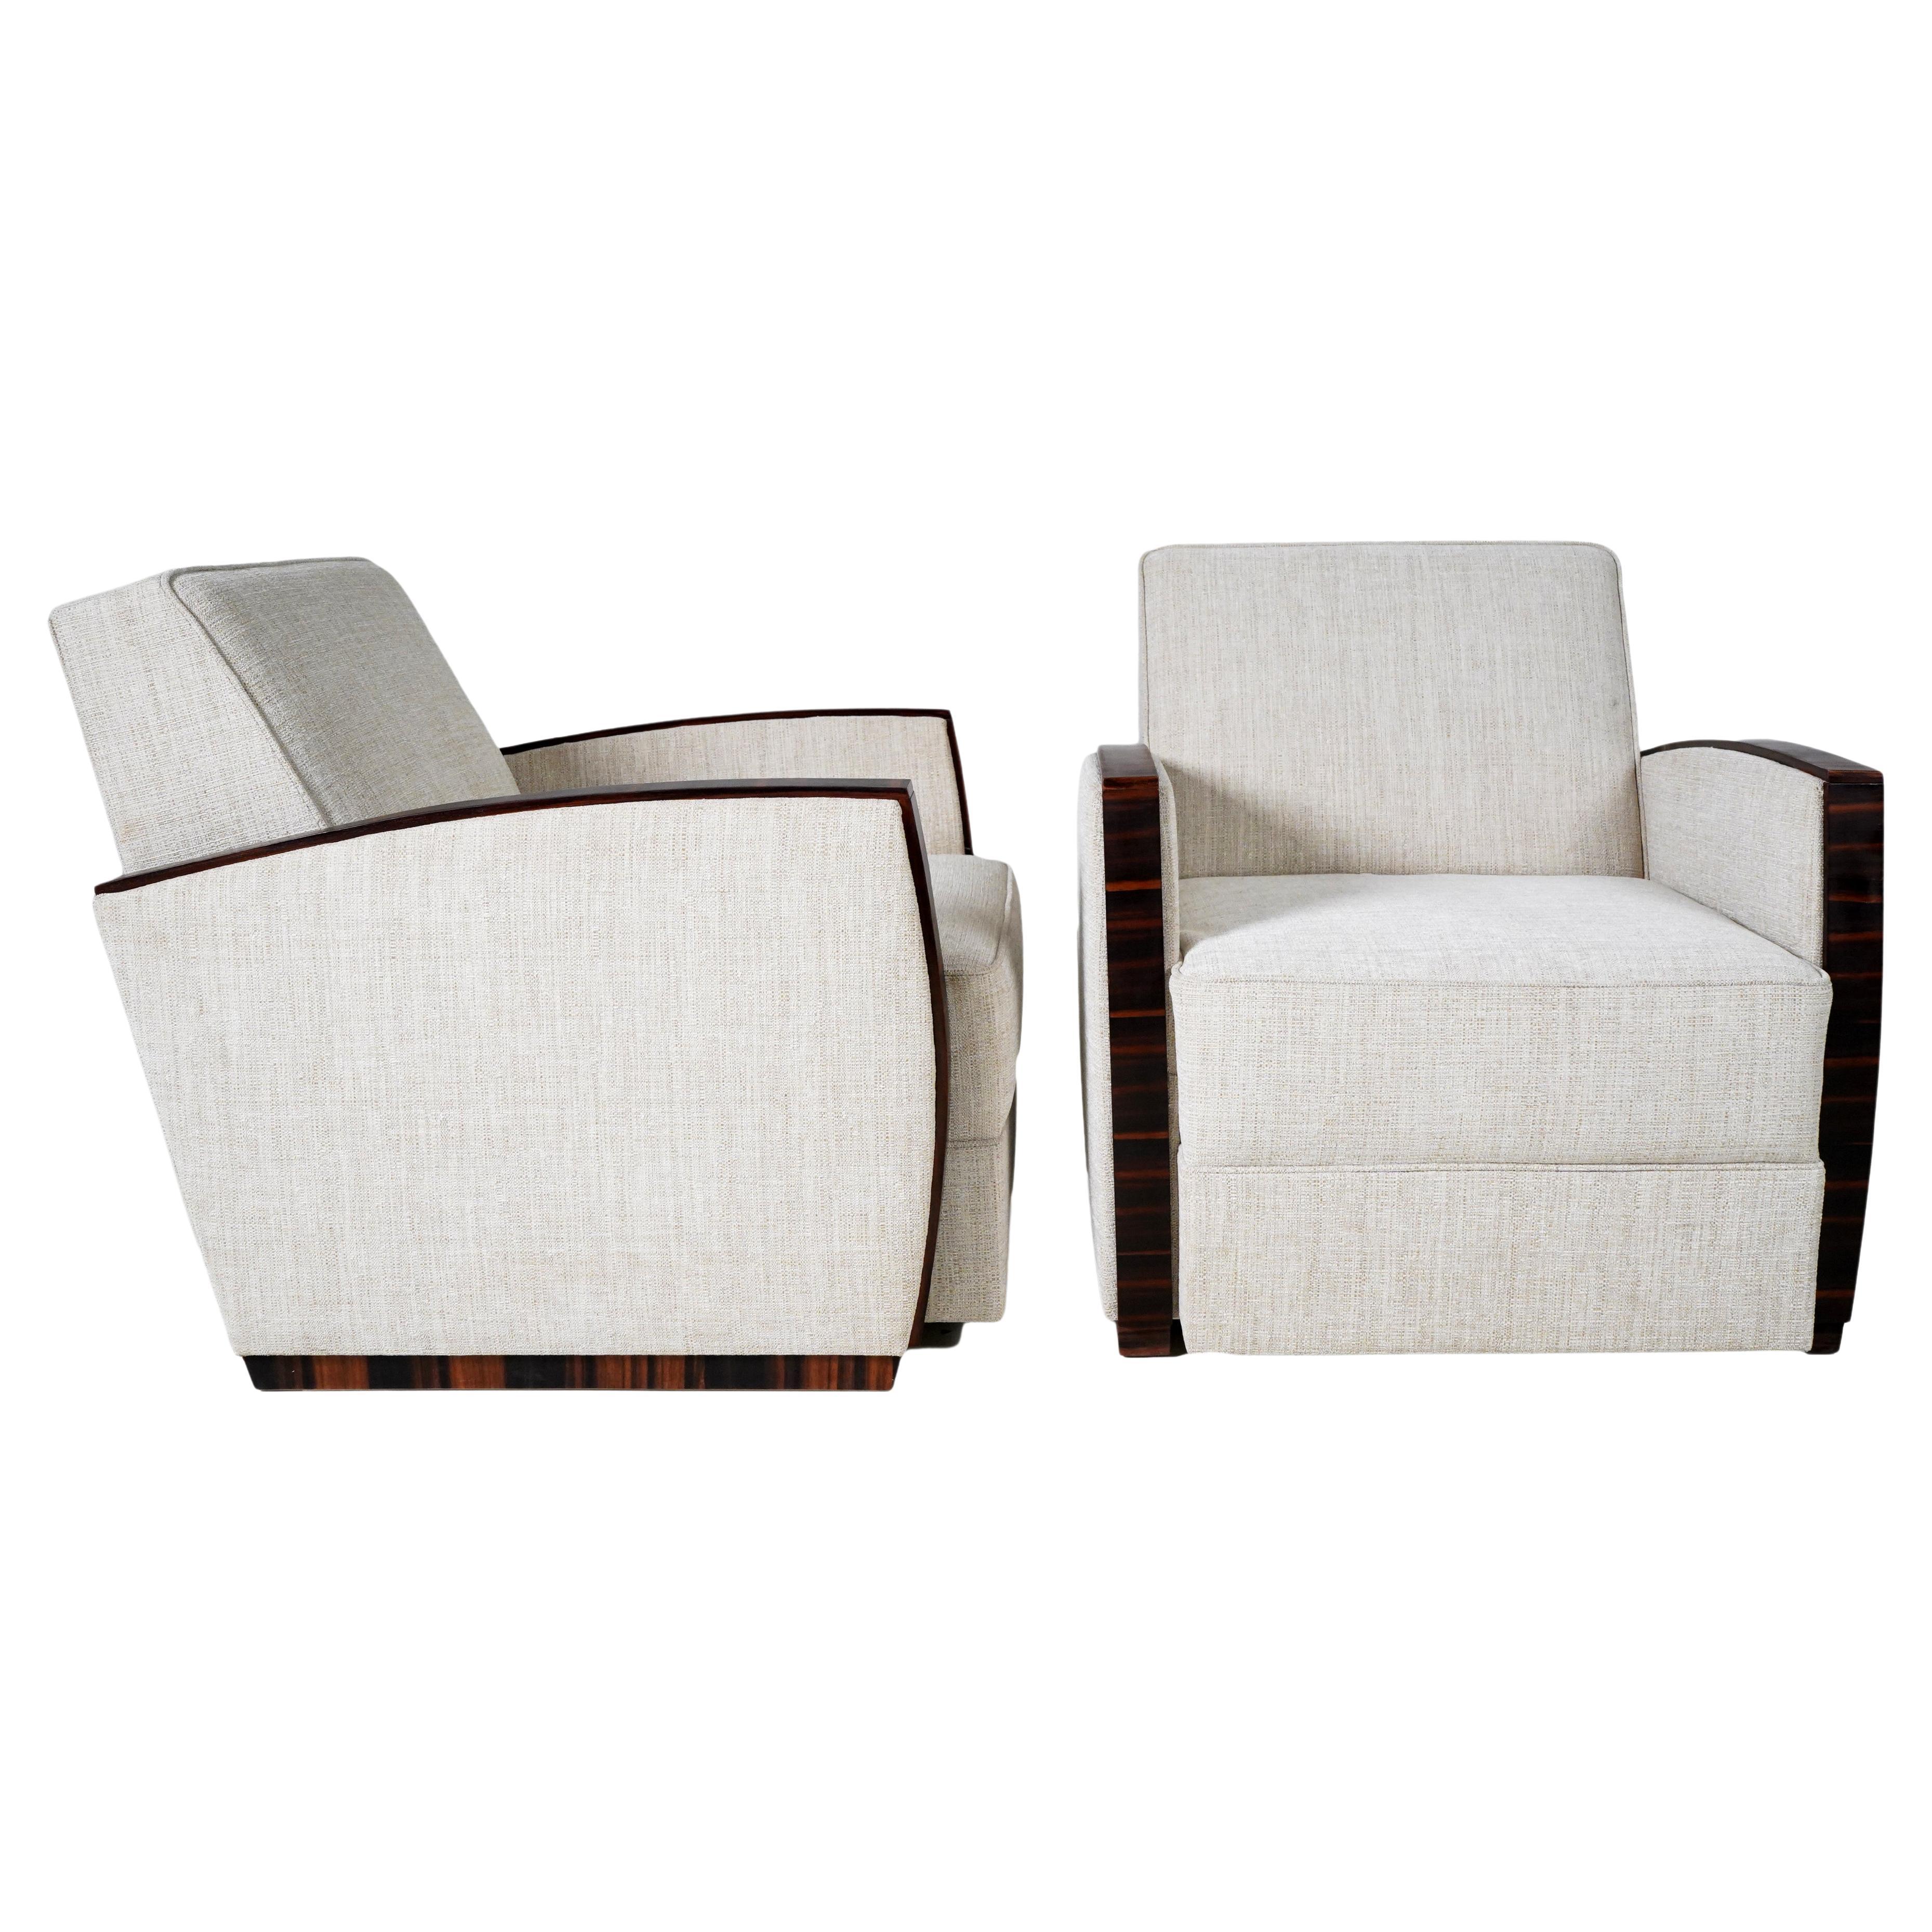 Pair of Art Deco Style Armchairs For Sale